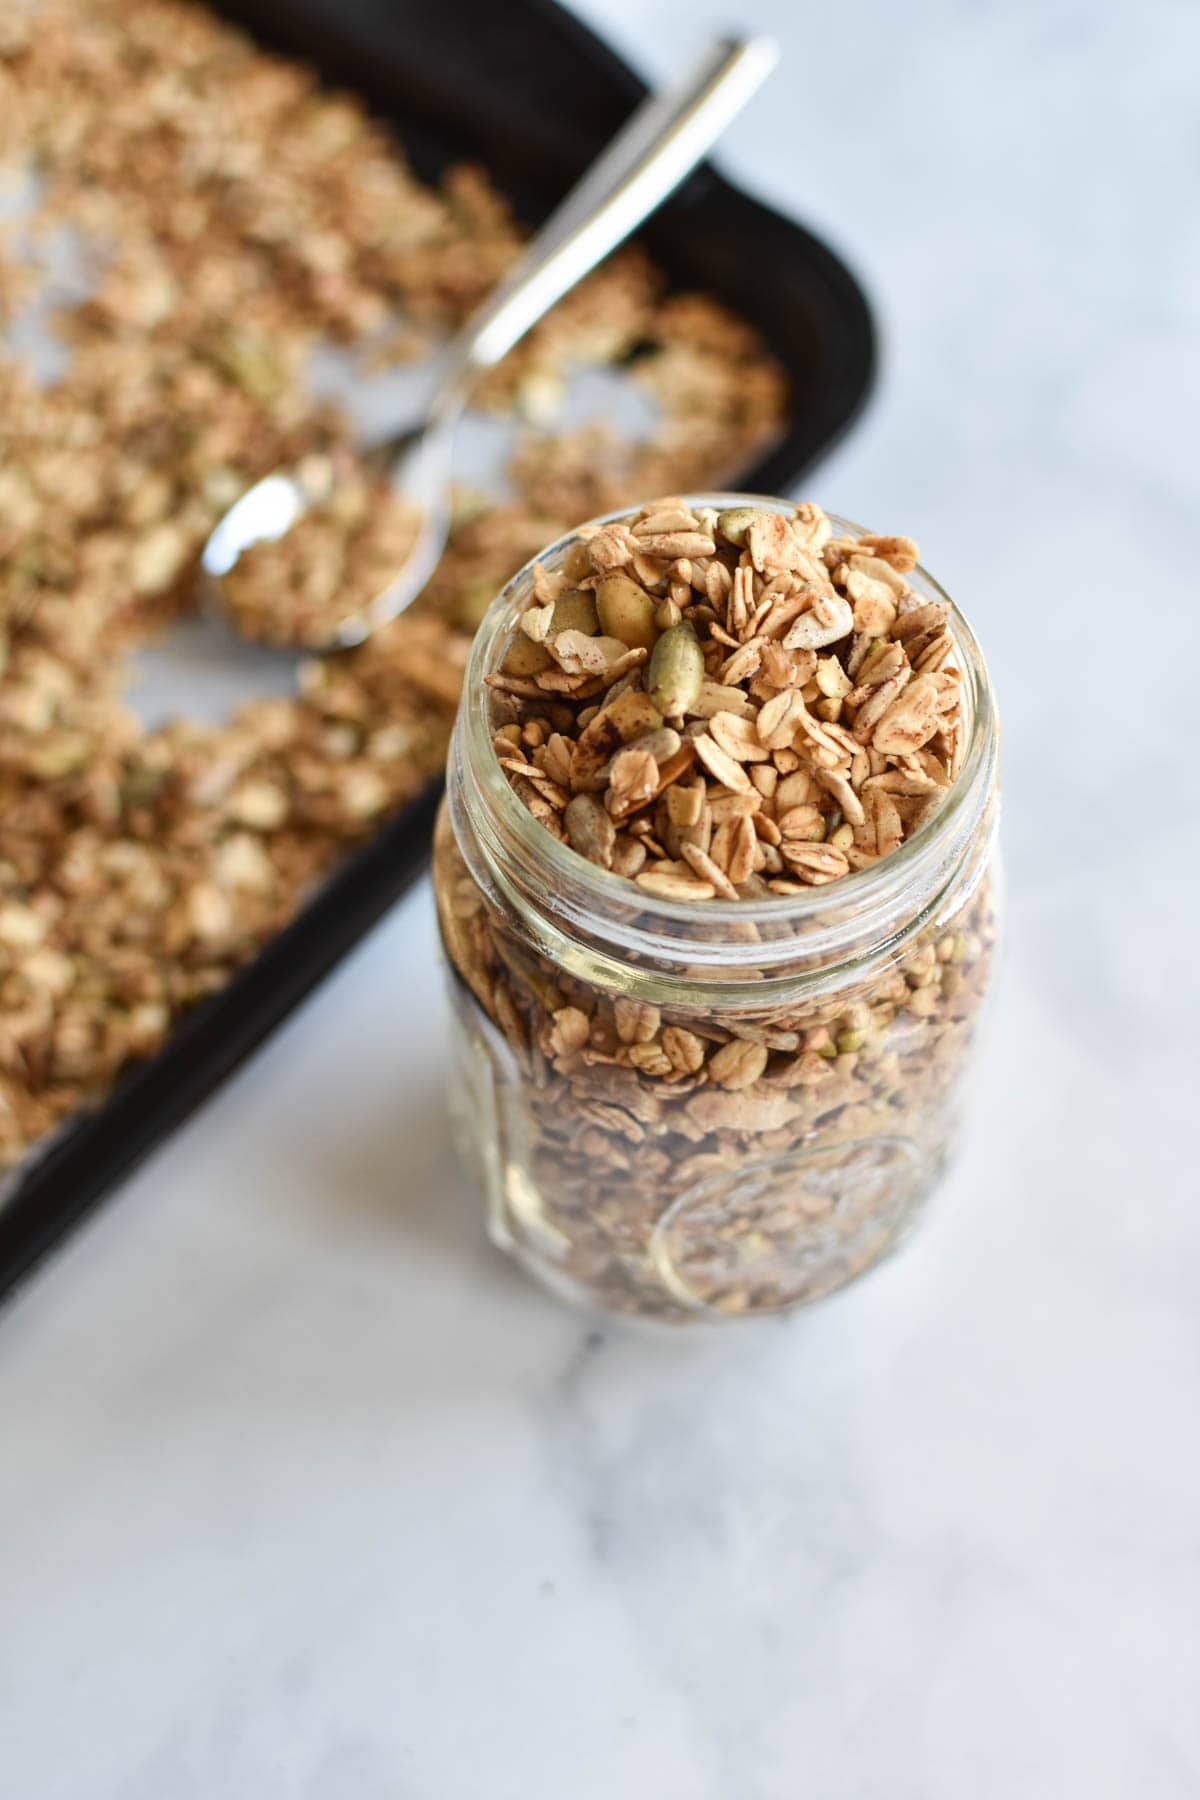 Granola in a mason jar next to a baking sheet with a spoon.